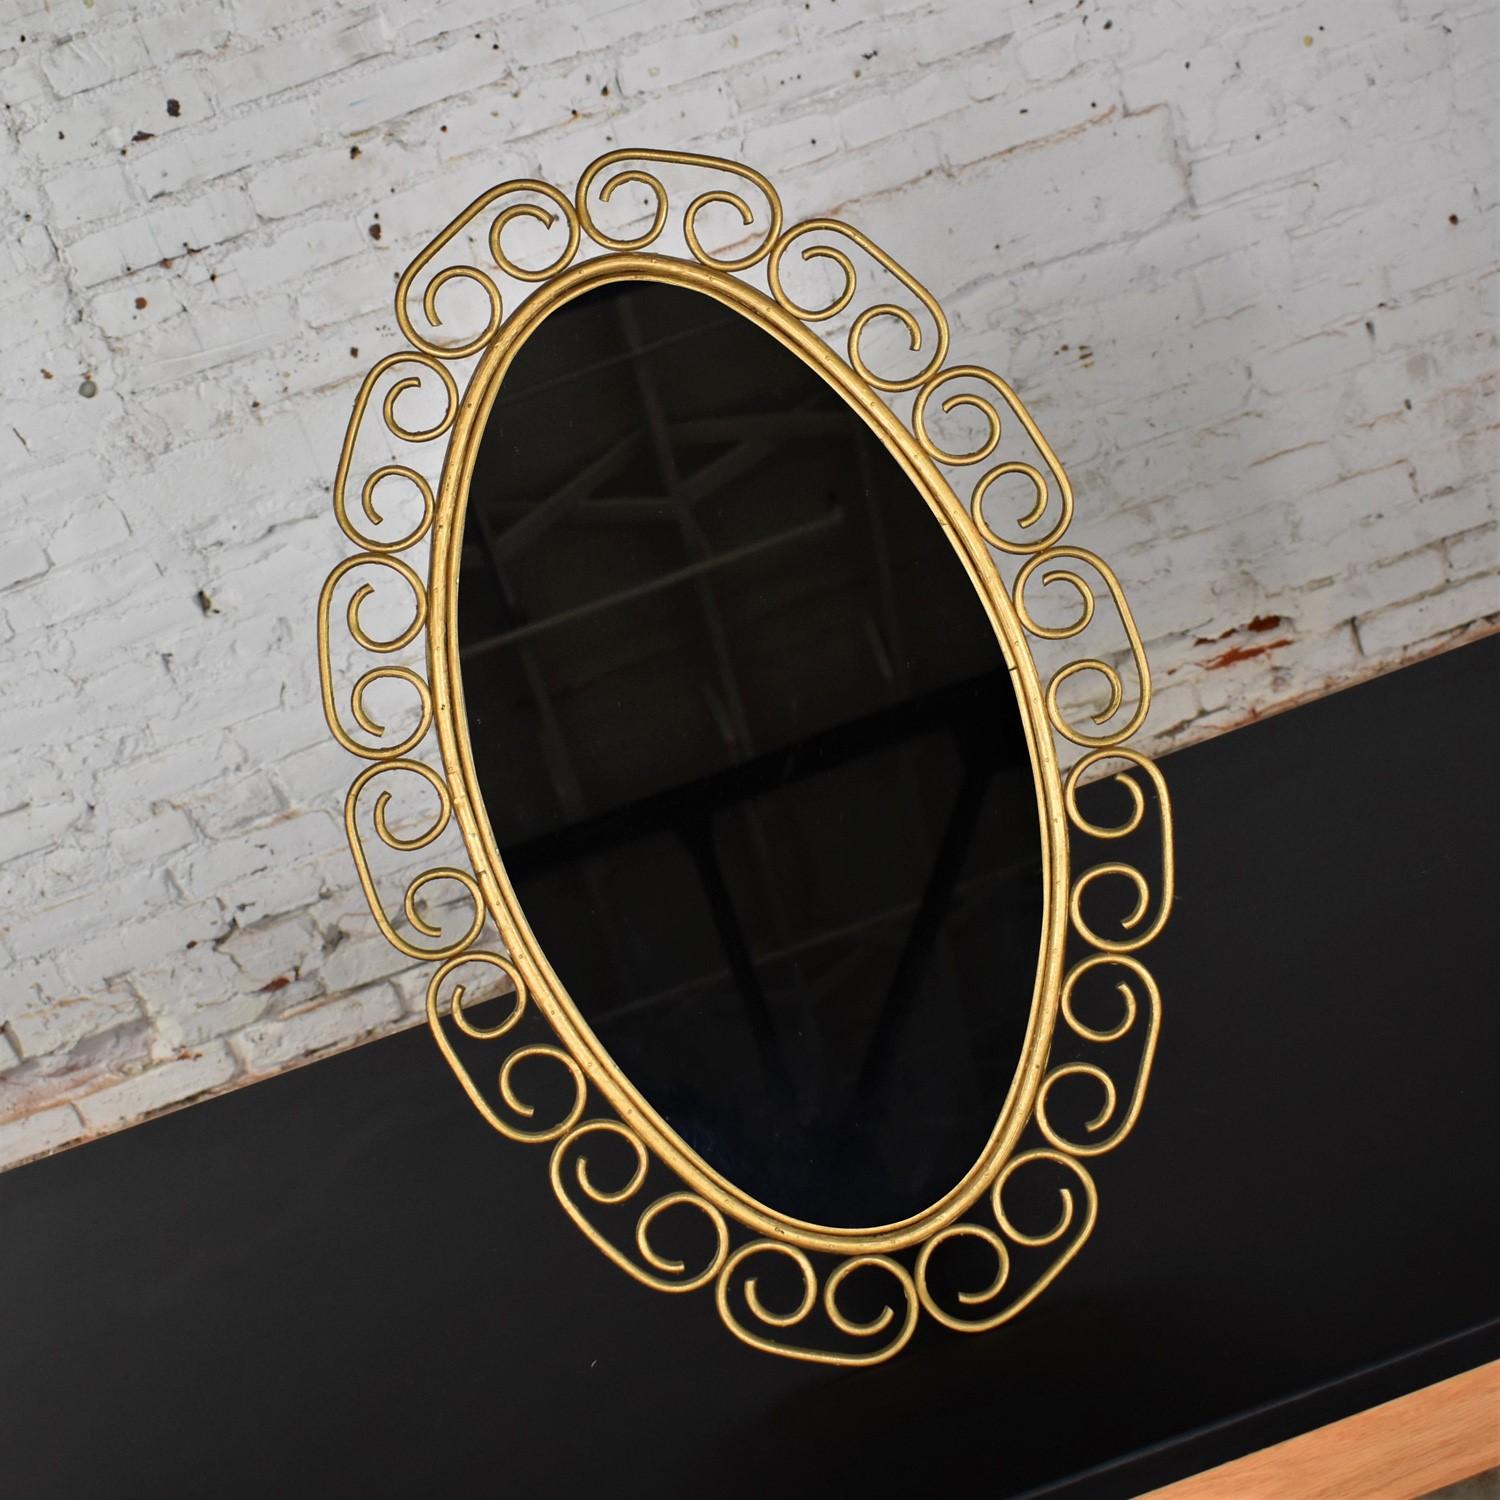 Wonderful vintage Hollywood Regency Bohemian free standing mirror with gold painted wicker scroll clad frame and easel style back. Beautiful condition, keeping in mind that this is vintage and not new so will have signs of use and wear. Please see